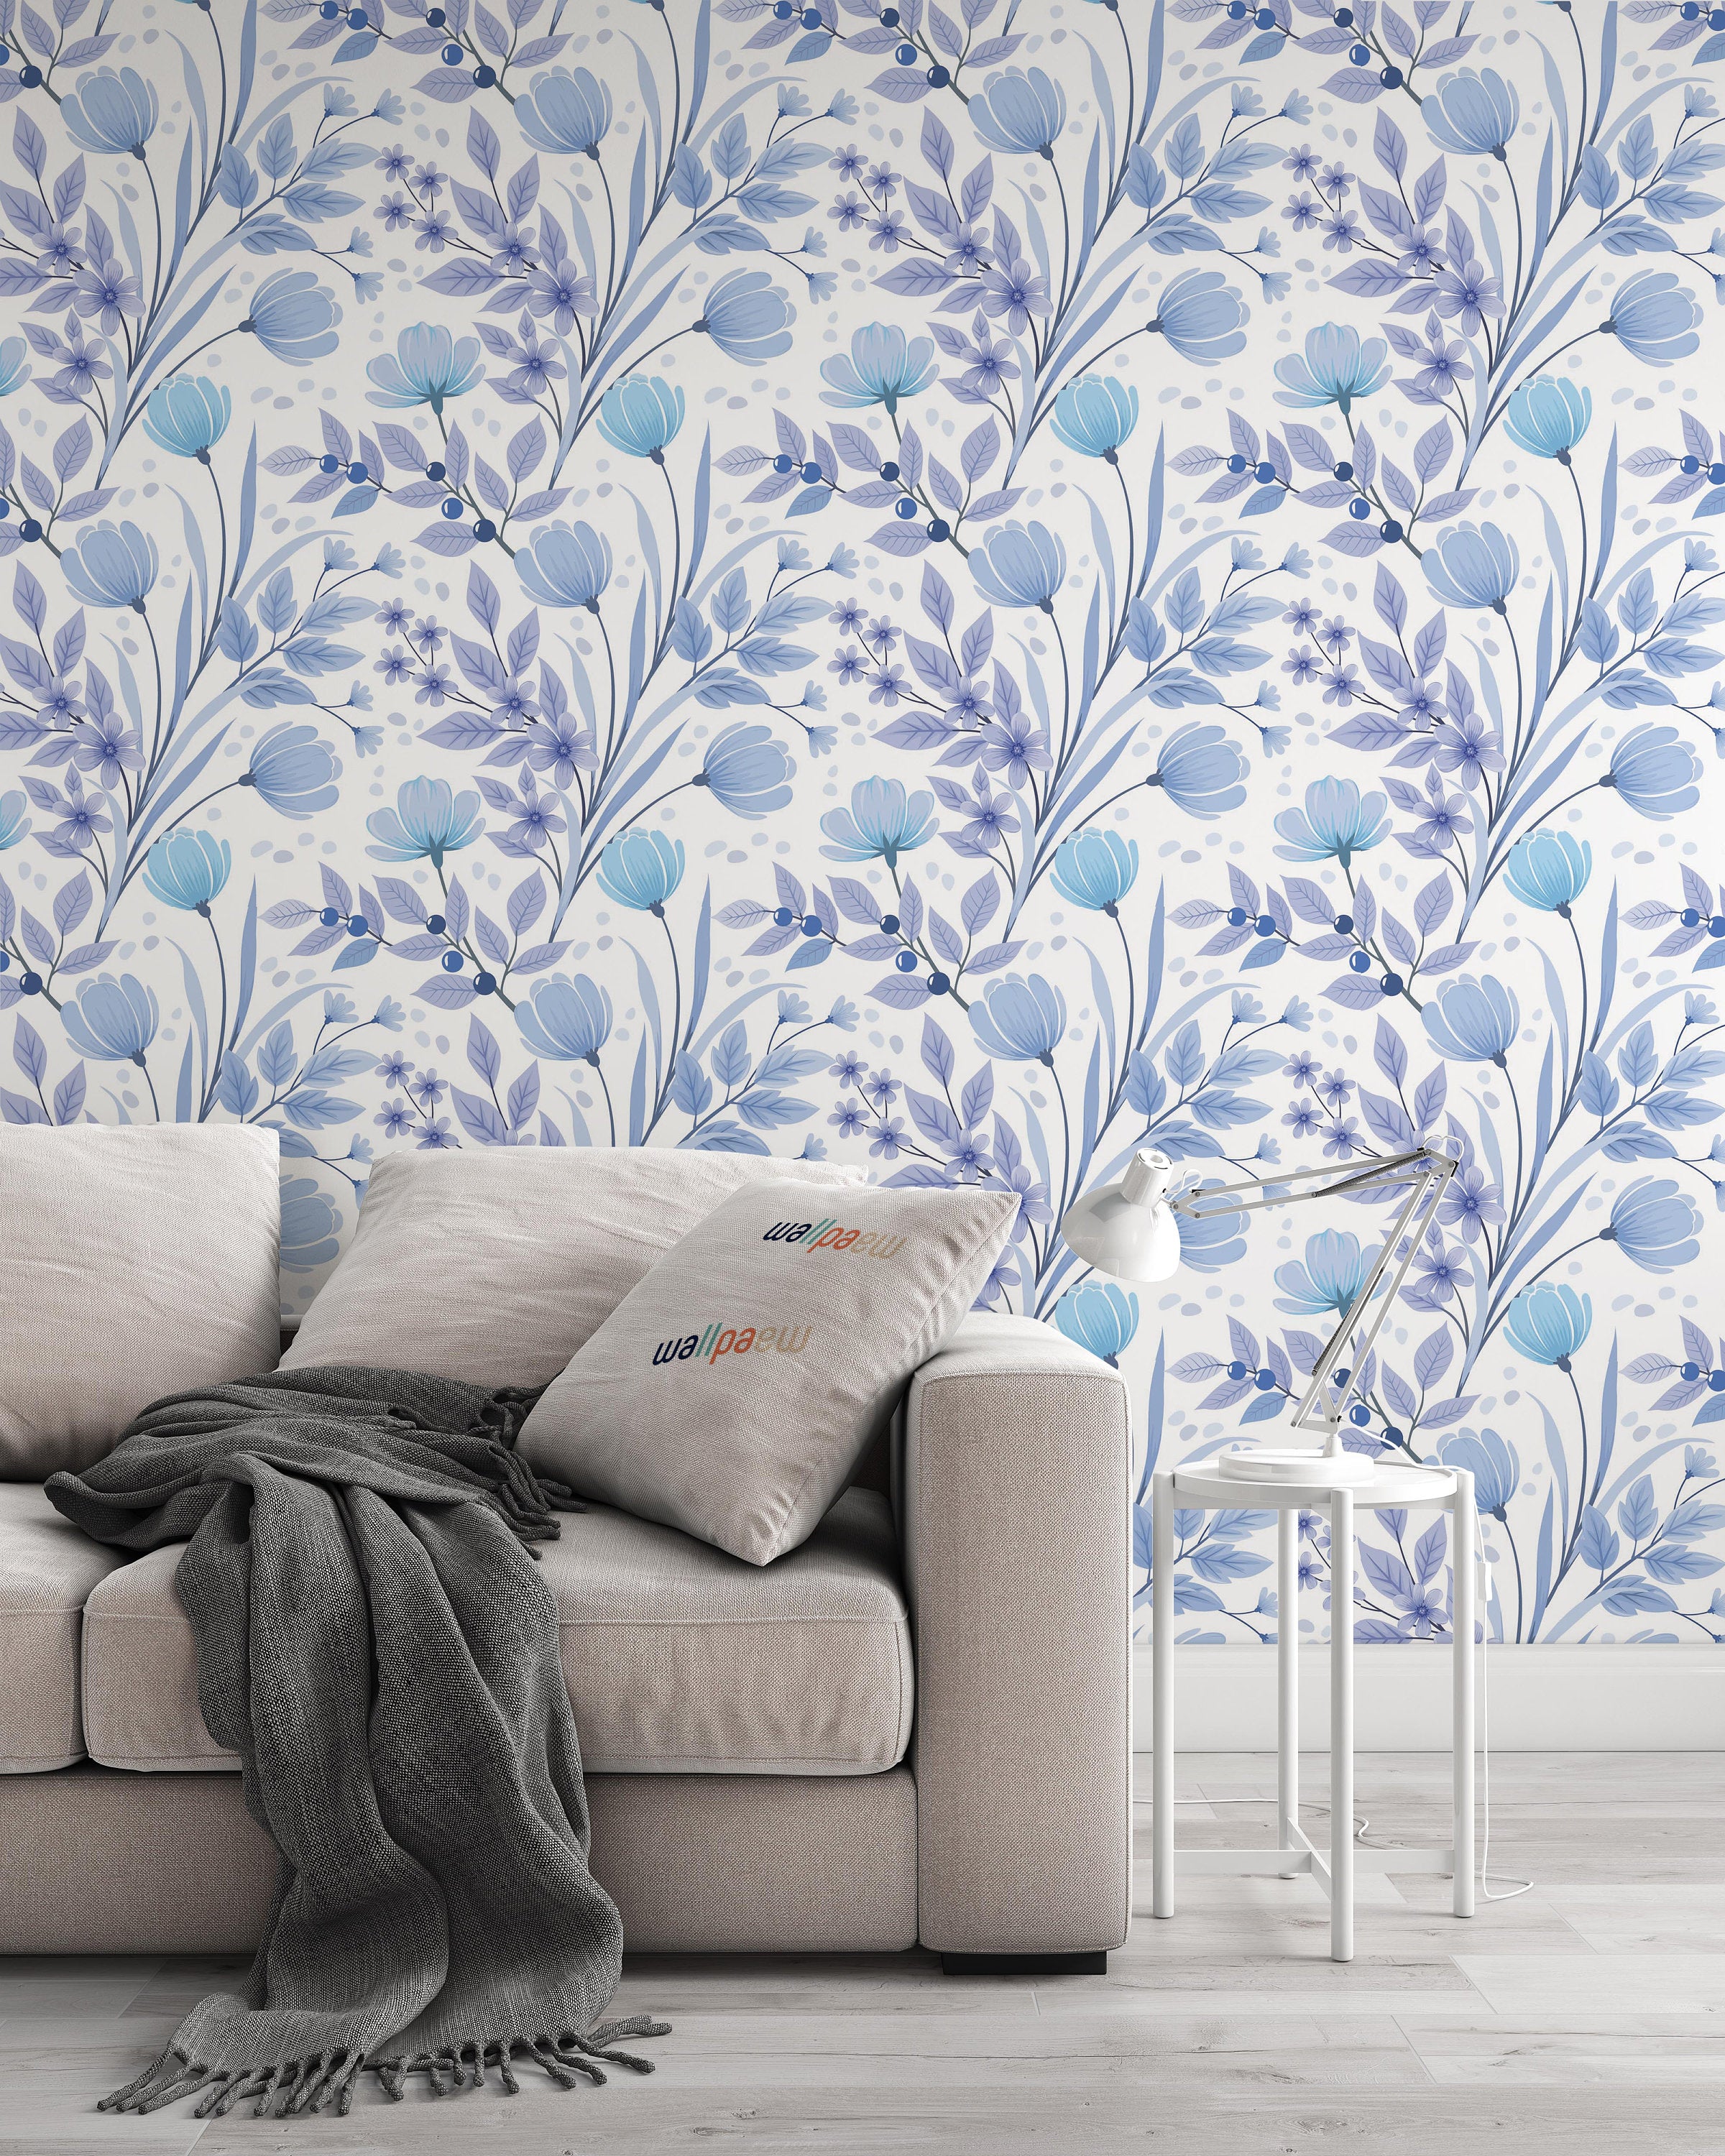 Floral Pattern on Blue Monochrome Background Wallpaper Self Adhesive Peel and Stick Wall Sticker Wall Decoration Removable